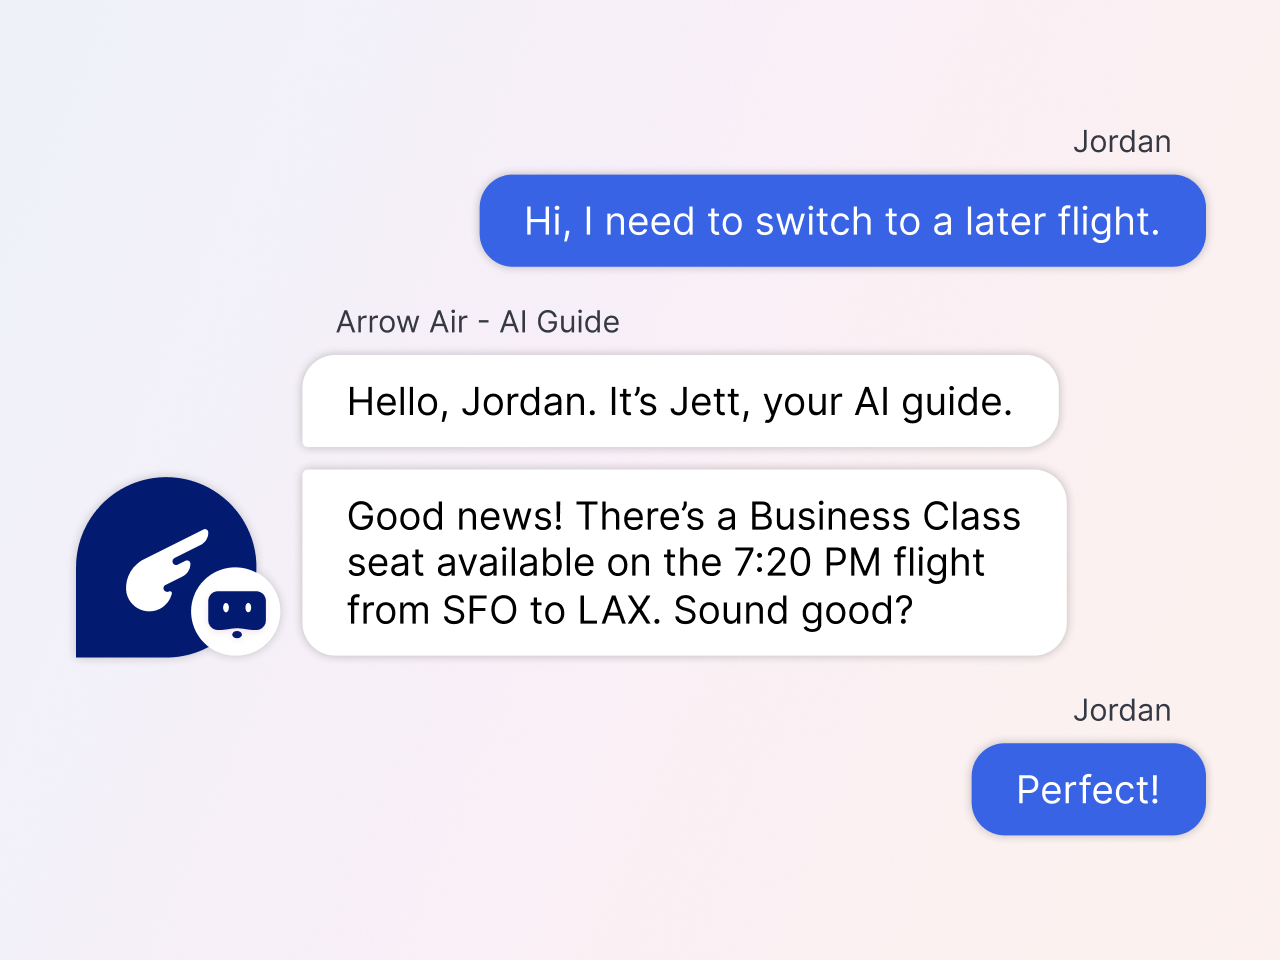 AI chatbot powered by generative technology helps traveler switch to later flight